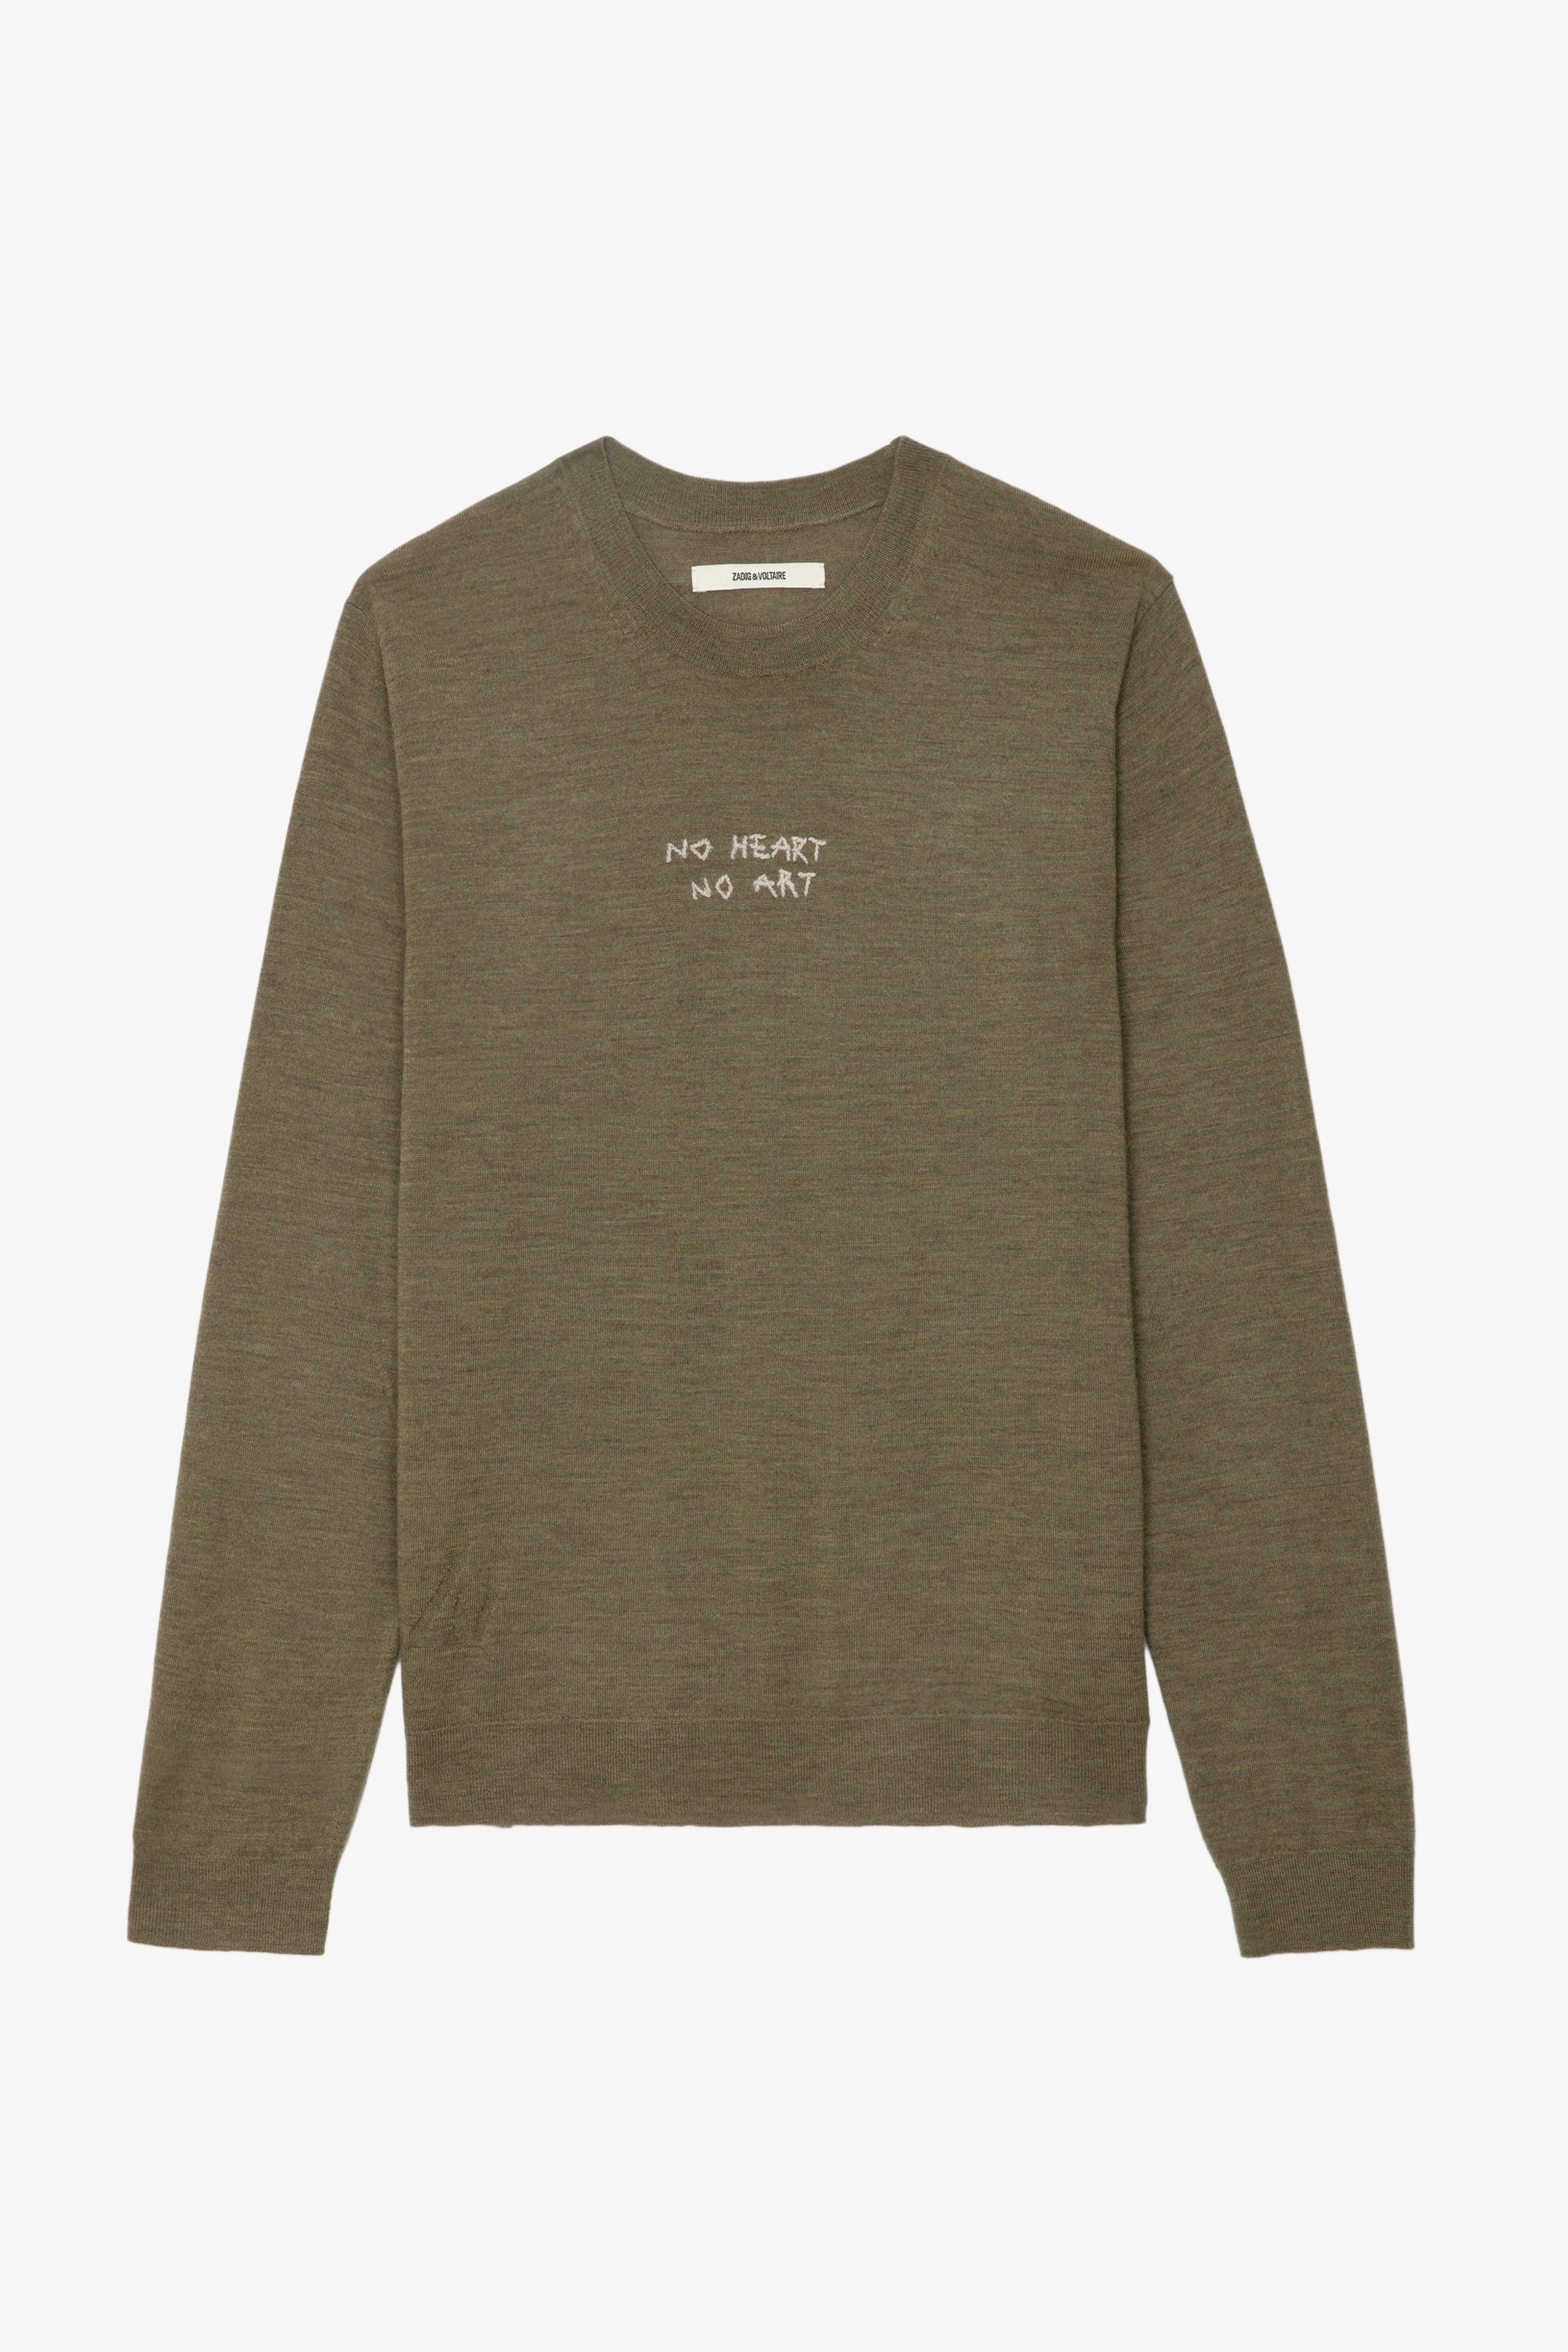 Kennedy Jumper - Distressed-effect khaki merino wool jumper with “No Heart No Art” embroidery designed by Humberto Cruz.